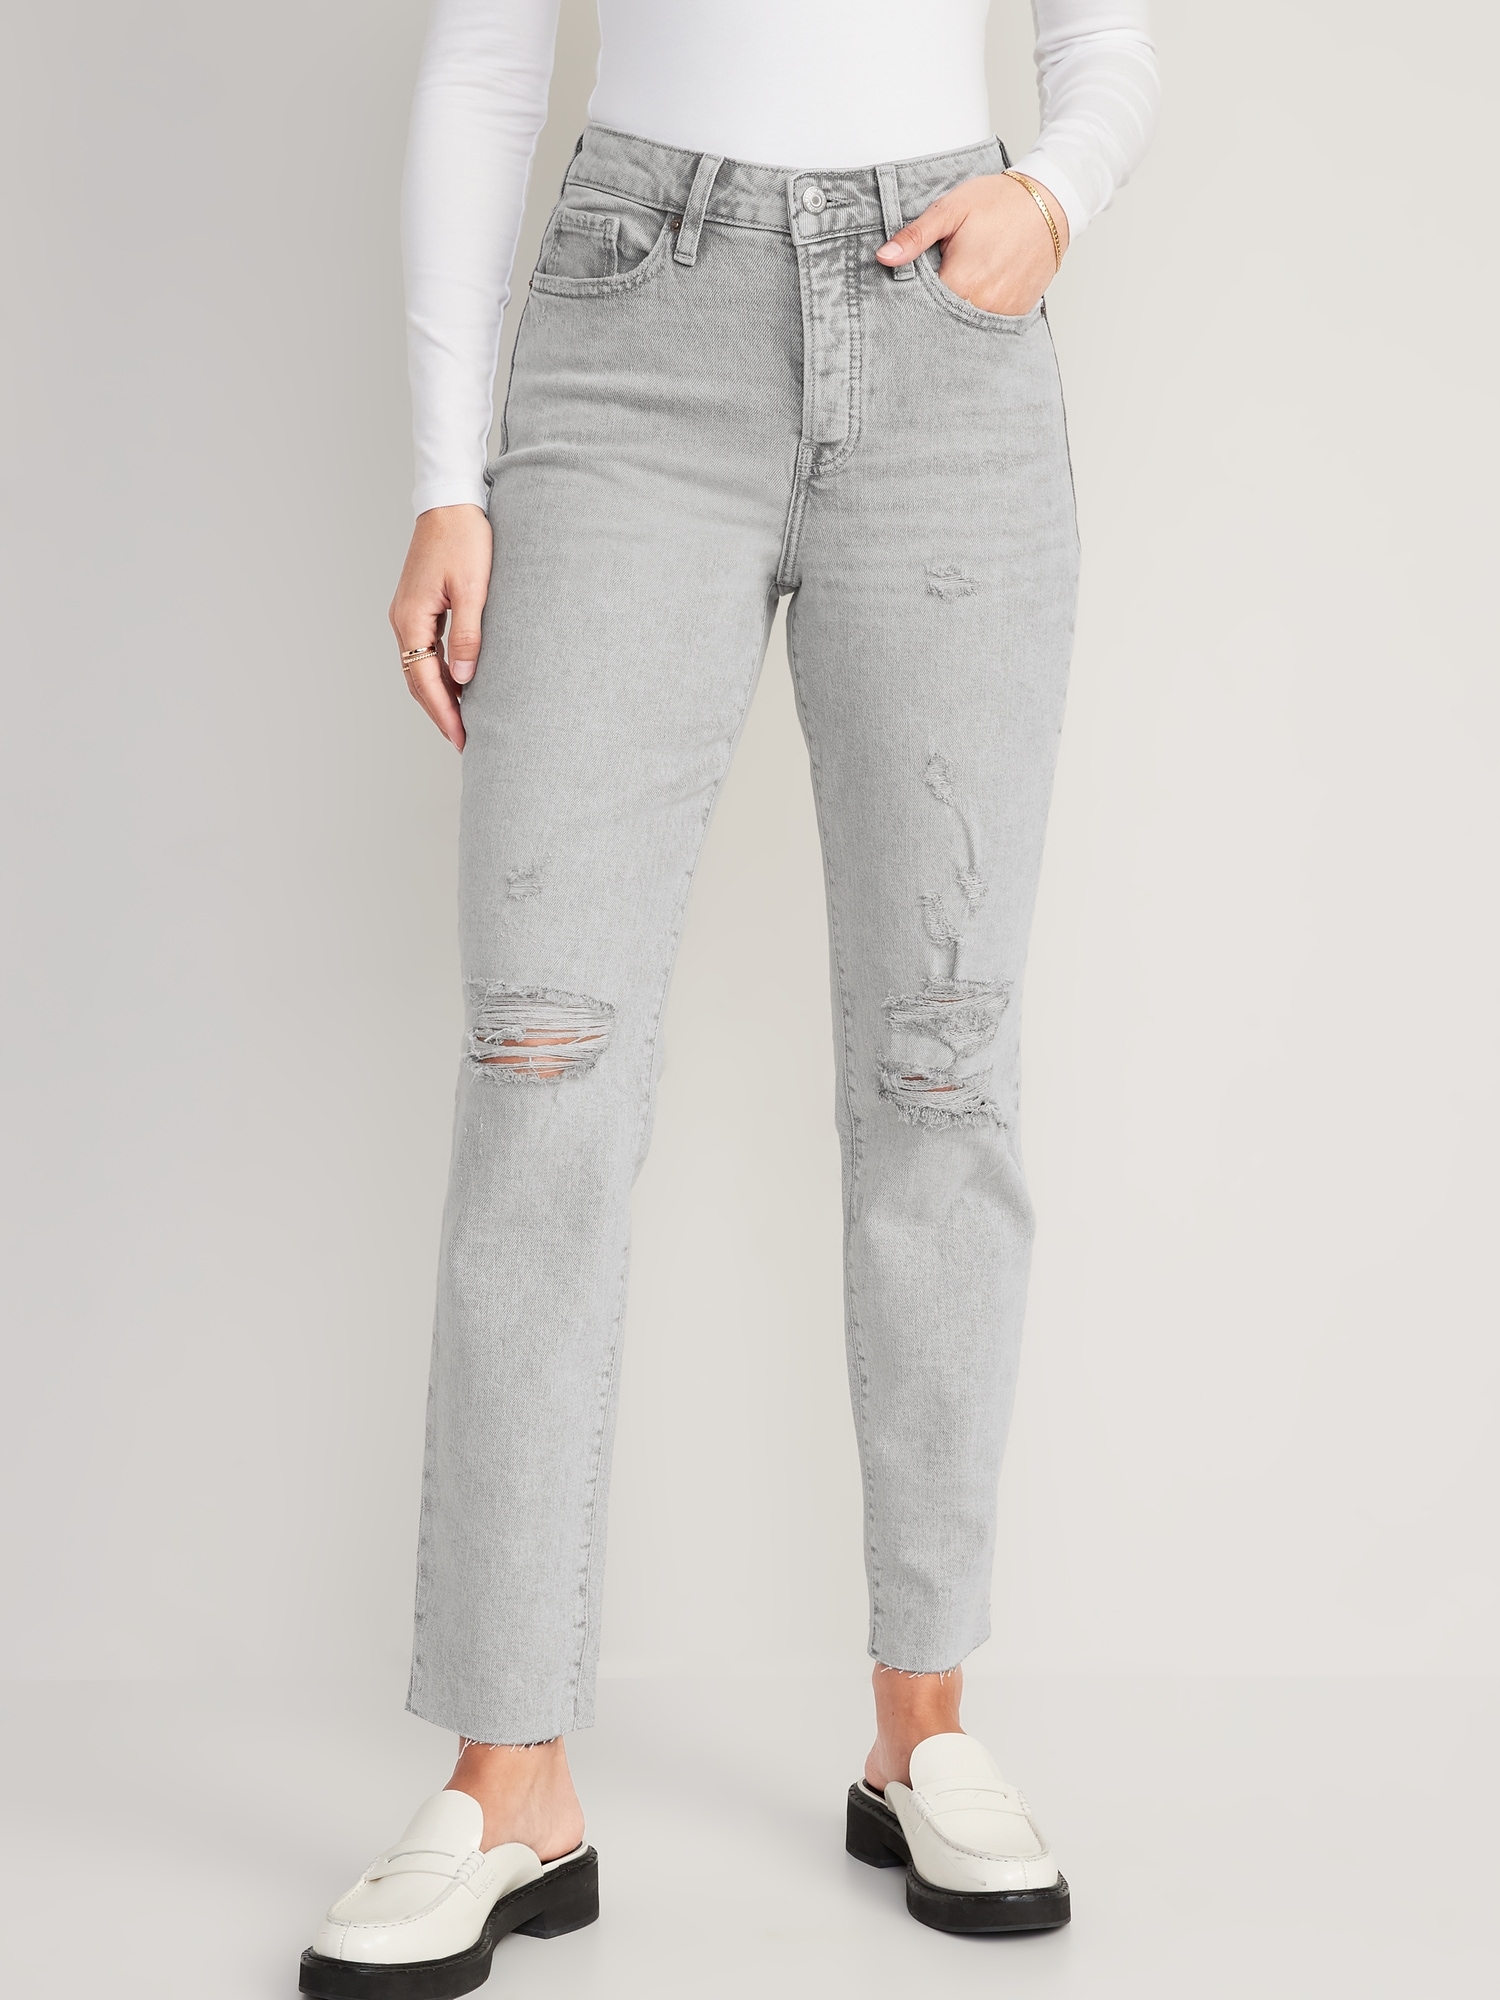 High-Waisted Button-Fly OG Straight Ripped Gray Cut-Off Jeans for Women ...